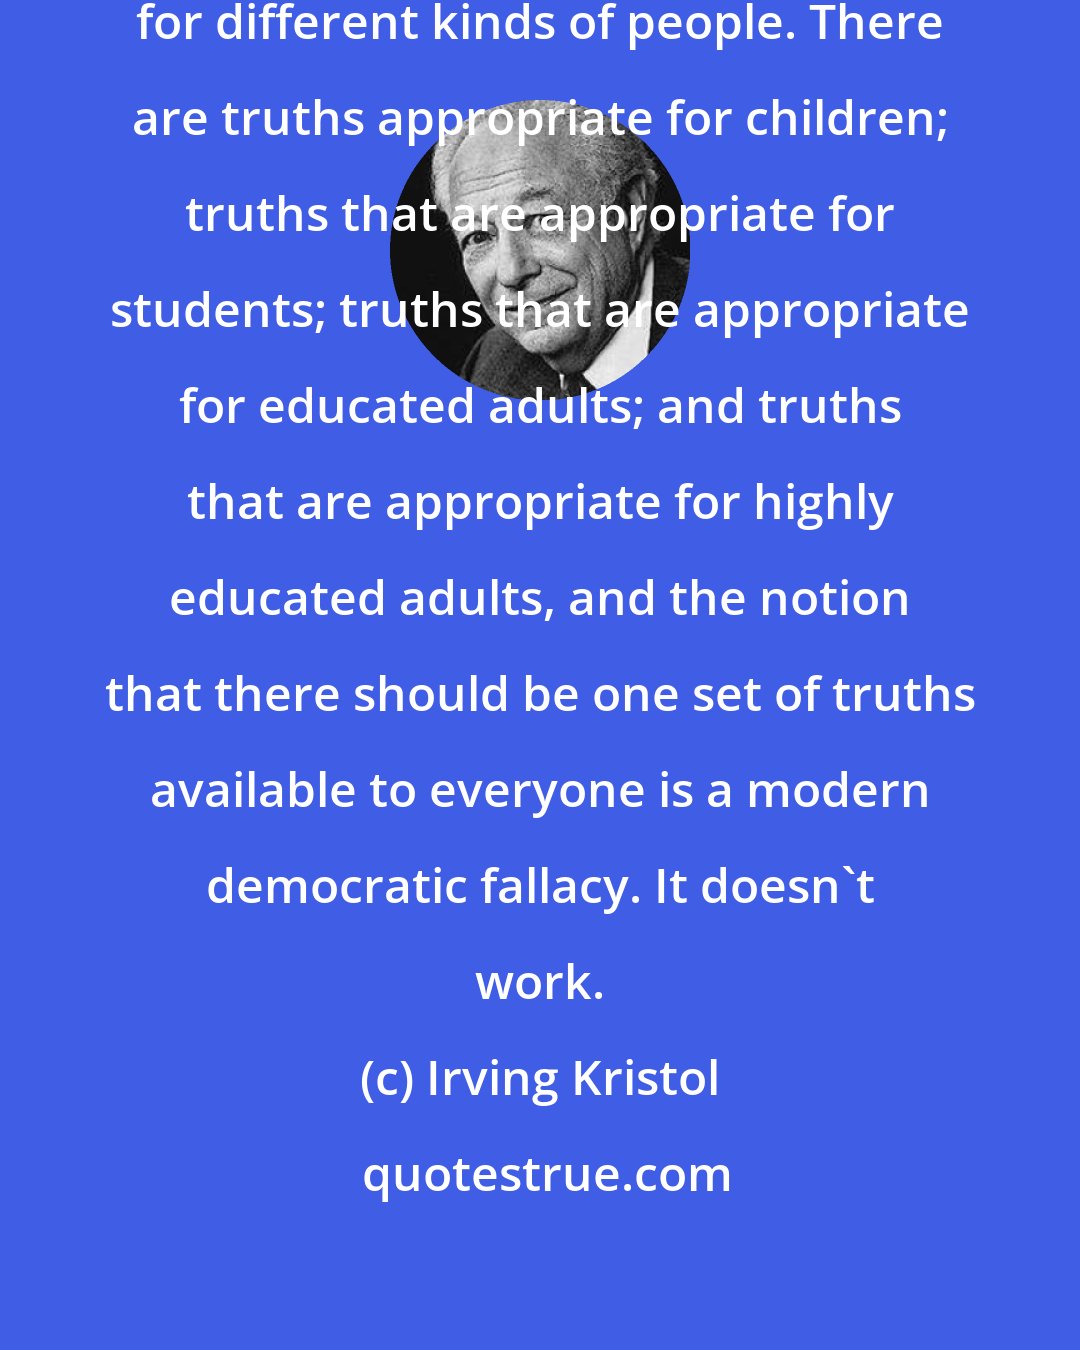 Irving Kristol: There are different kinds of truths for different kinds of people. There are truths appropriate for children; truths that are appropriate for students; truths that are appropriate for educated adults; and truths that are appropriate for highly educated adults, and the notion that there should be one set of truths available to everyone is a modern democratic fallacy. It doesn't work.